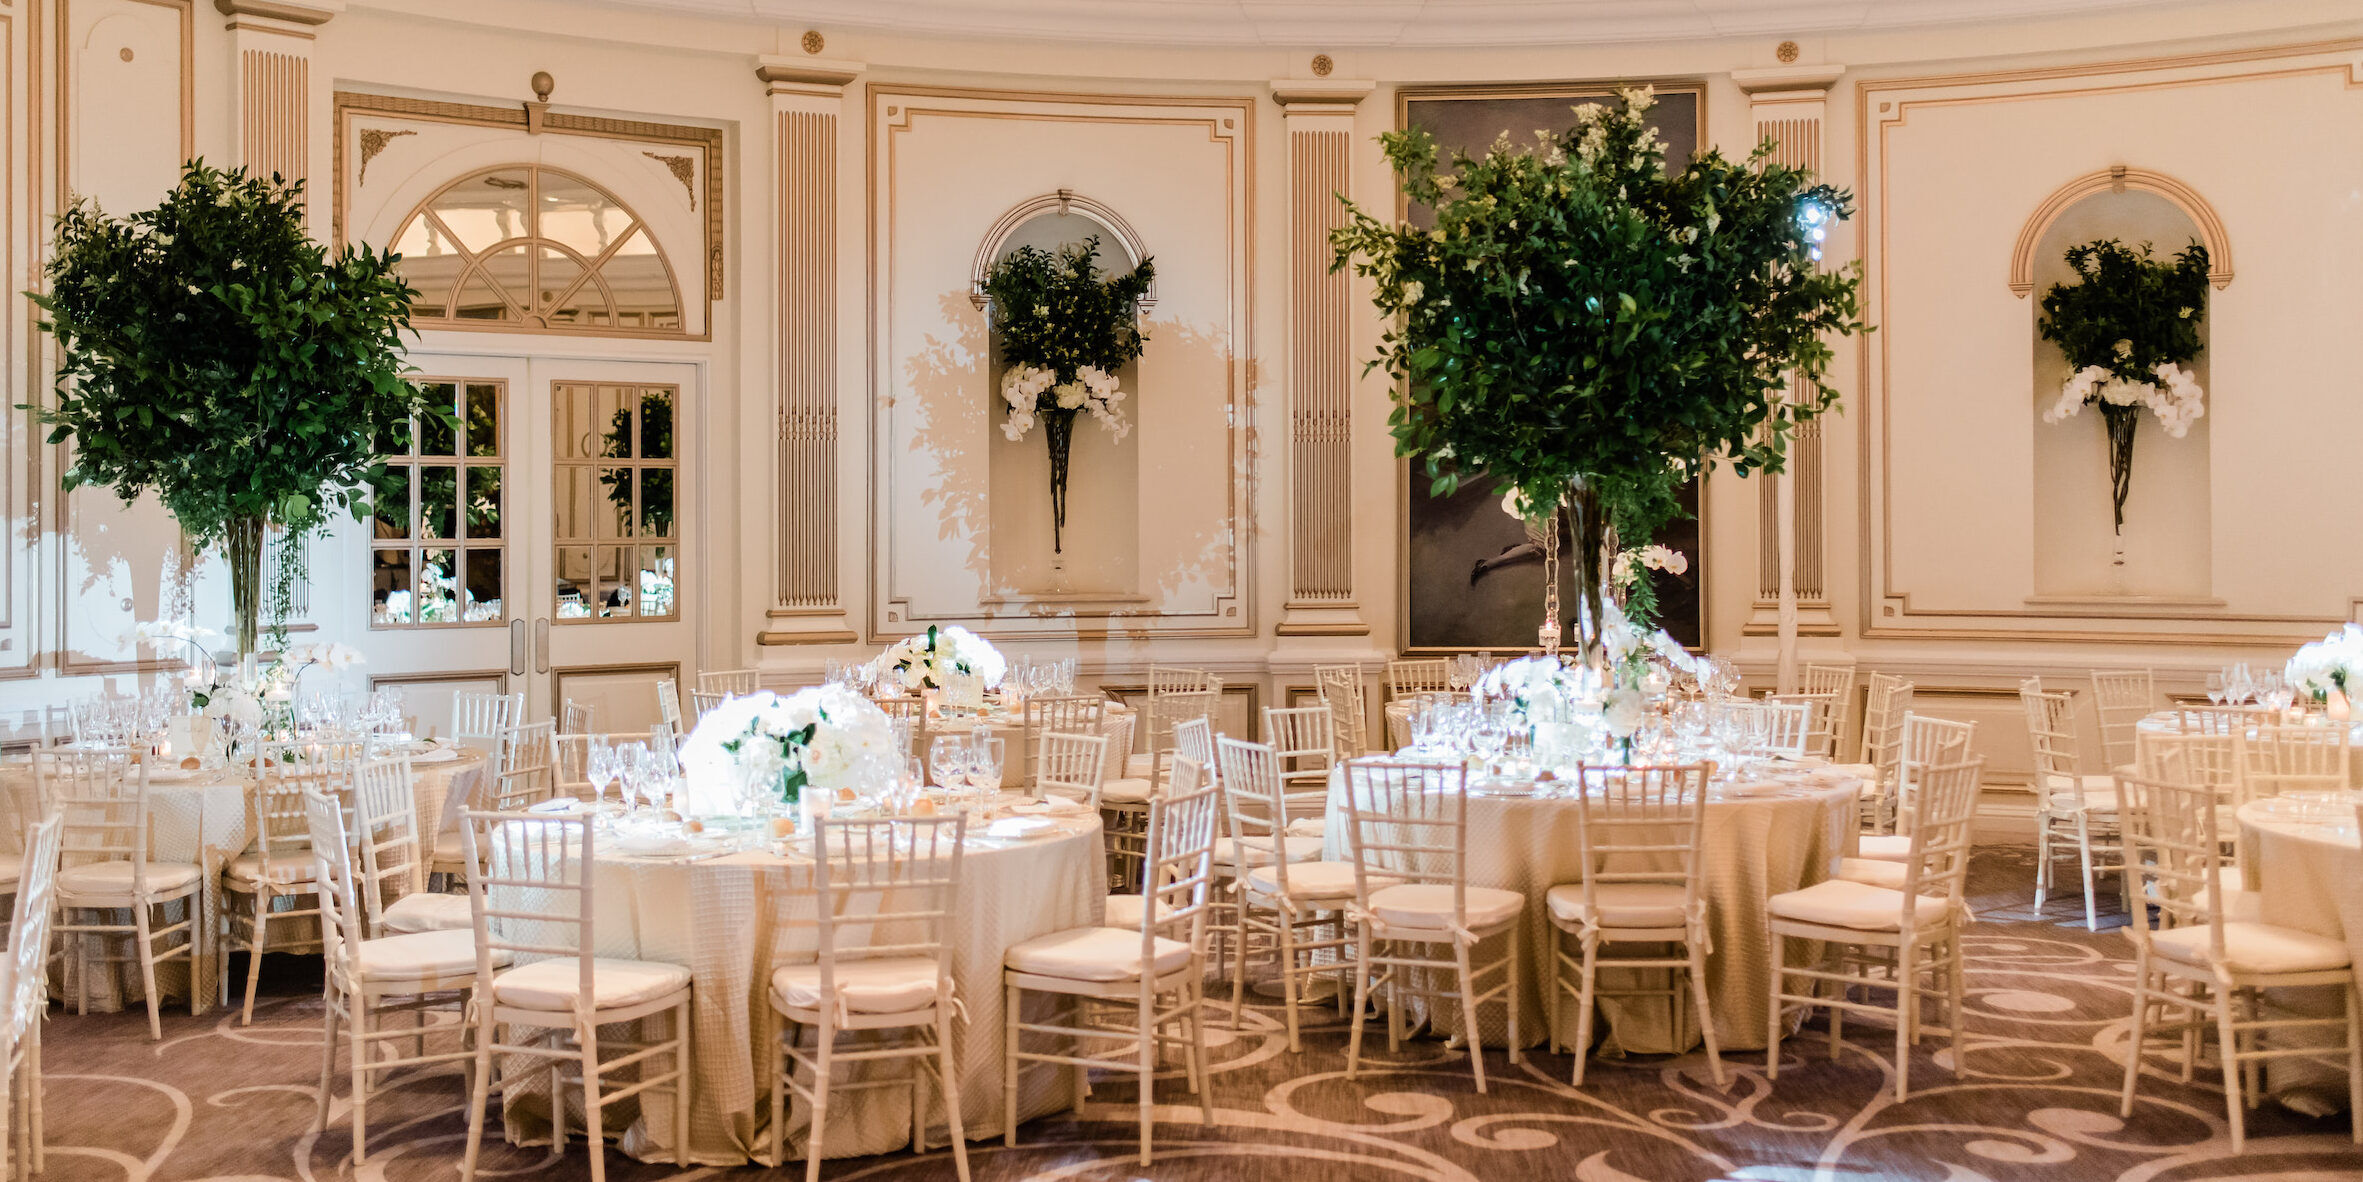 Bright, light wedding reception set up in the ballroom of the Lotte New York Palace